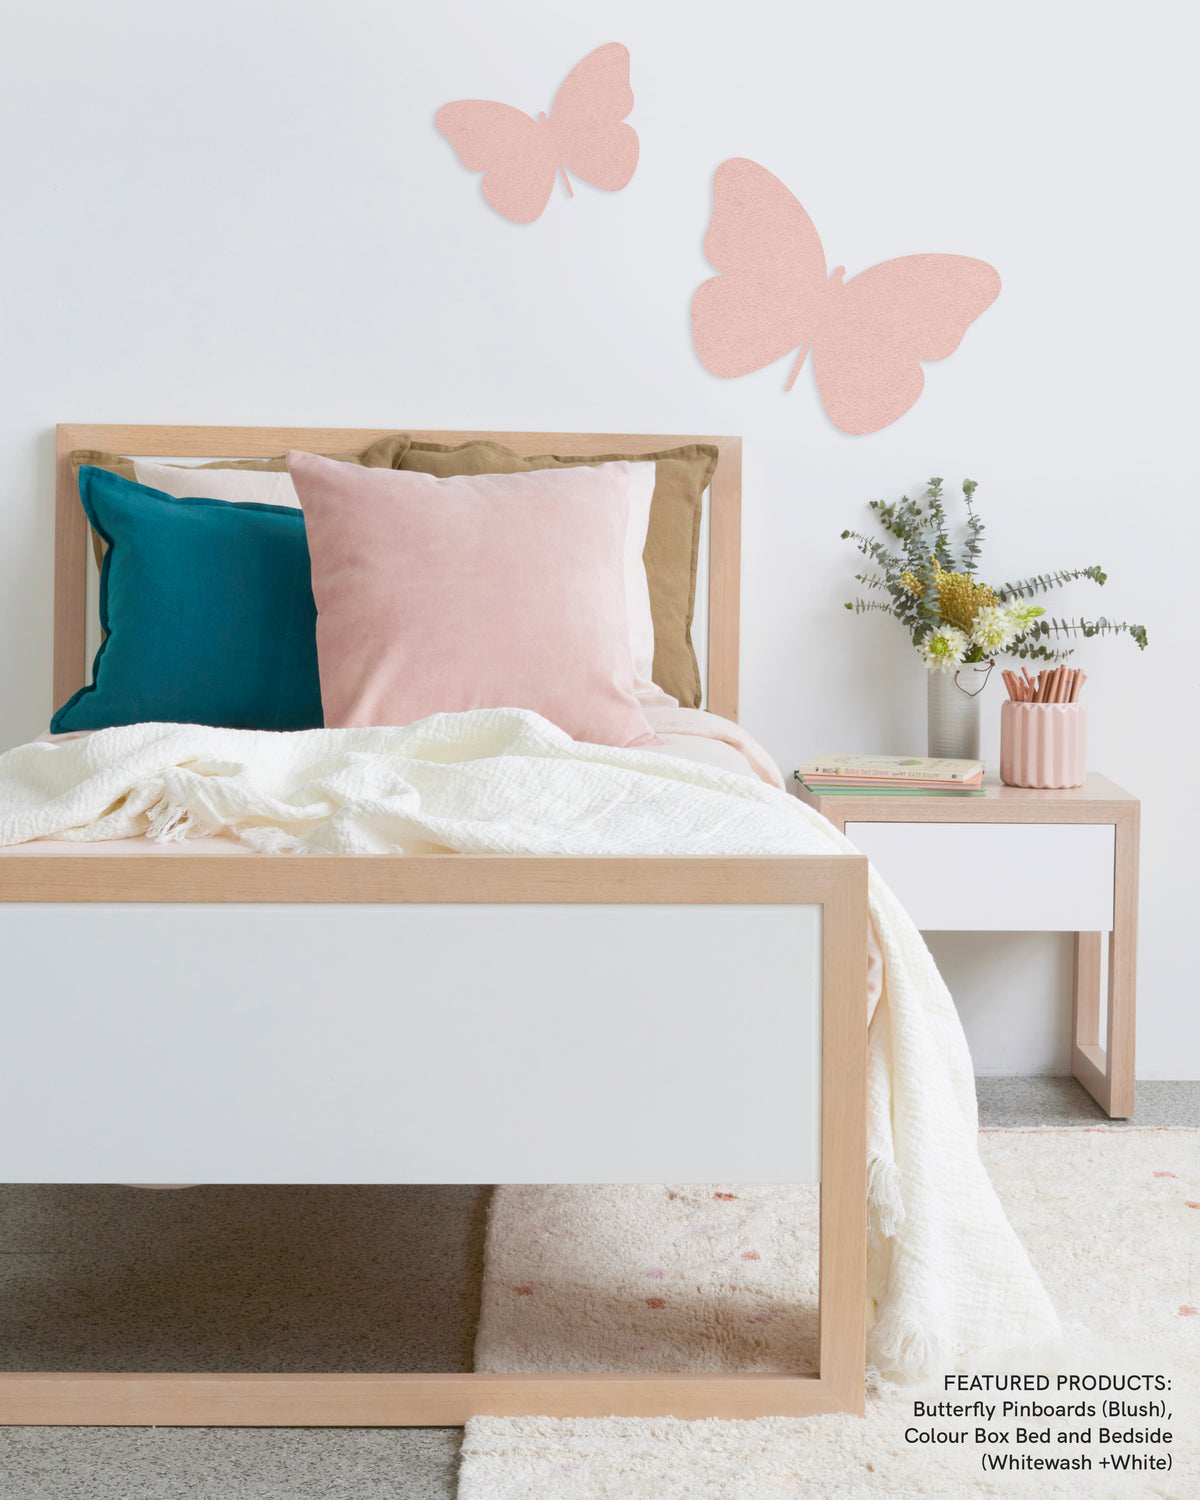 Our Butterfly Wall Decors have a beautiful felt-like appearance, and are amazing to touch as well as visually appealing in kids bedrooms and playrooms. They come with easy peel and stick tabs for your wall and look great singularly or in multiples to create a dynamic wall feature for kids interiors.